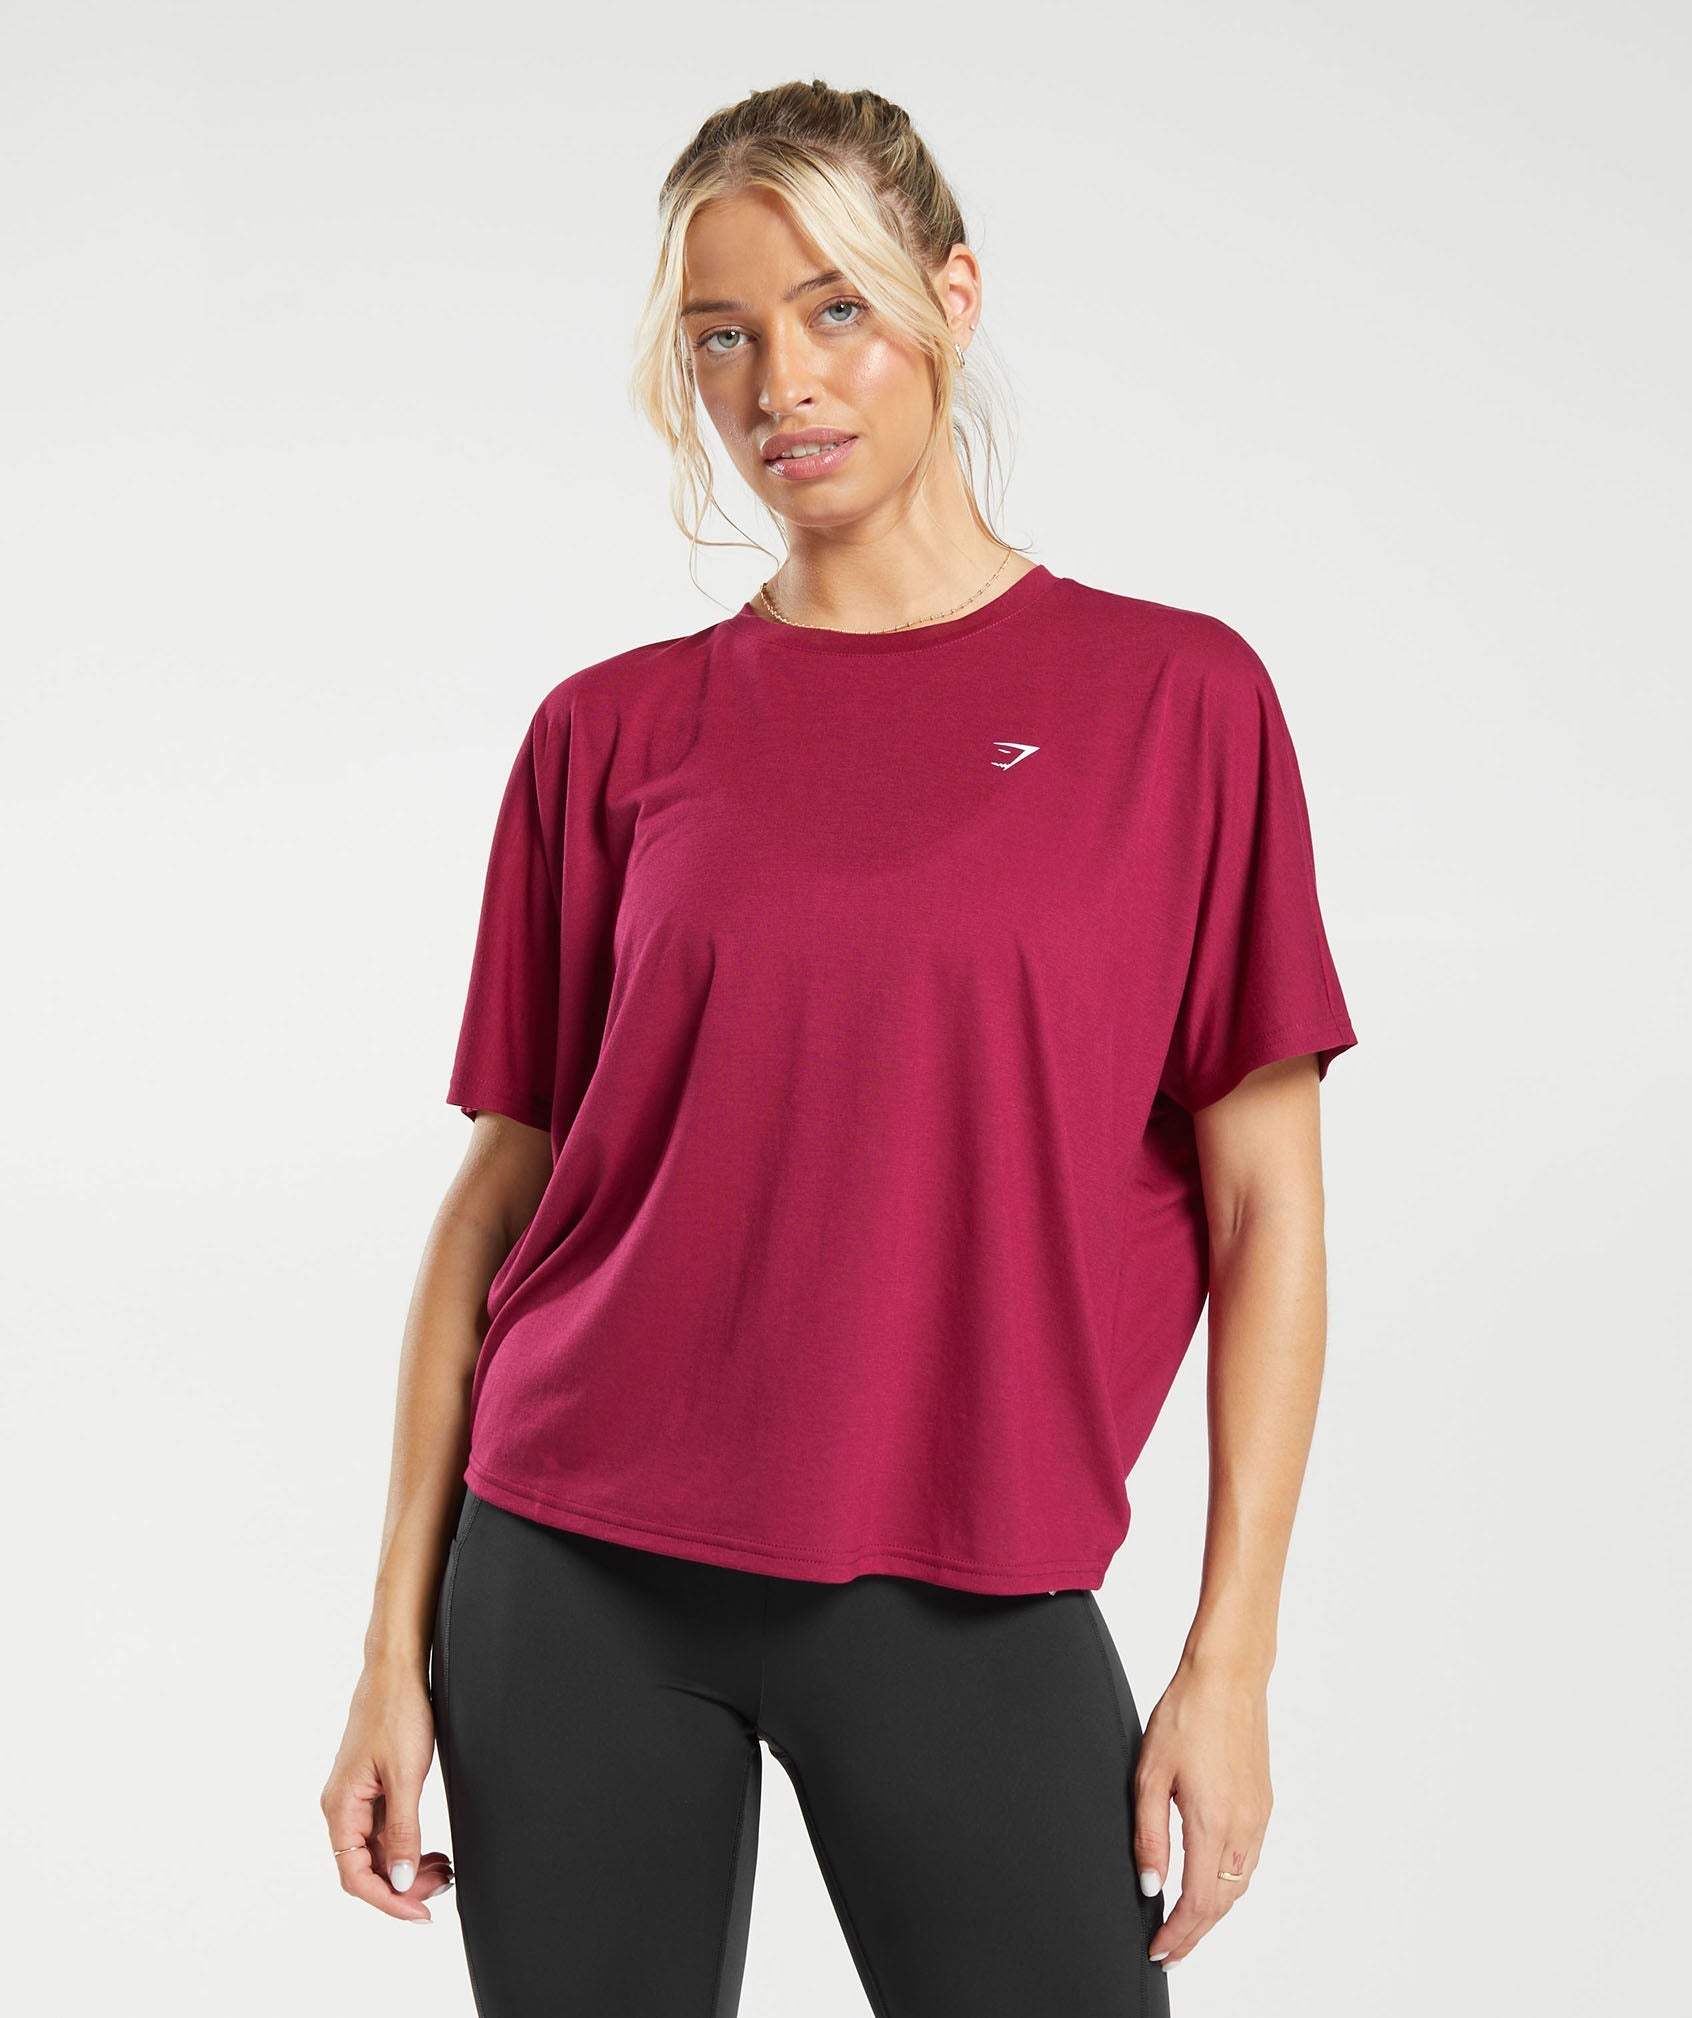 Super Soft T-Shirt in Raspberry Pink - view 1